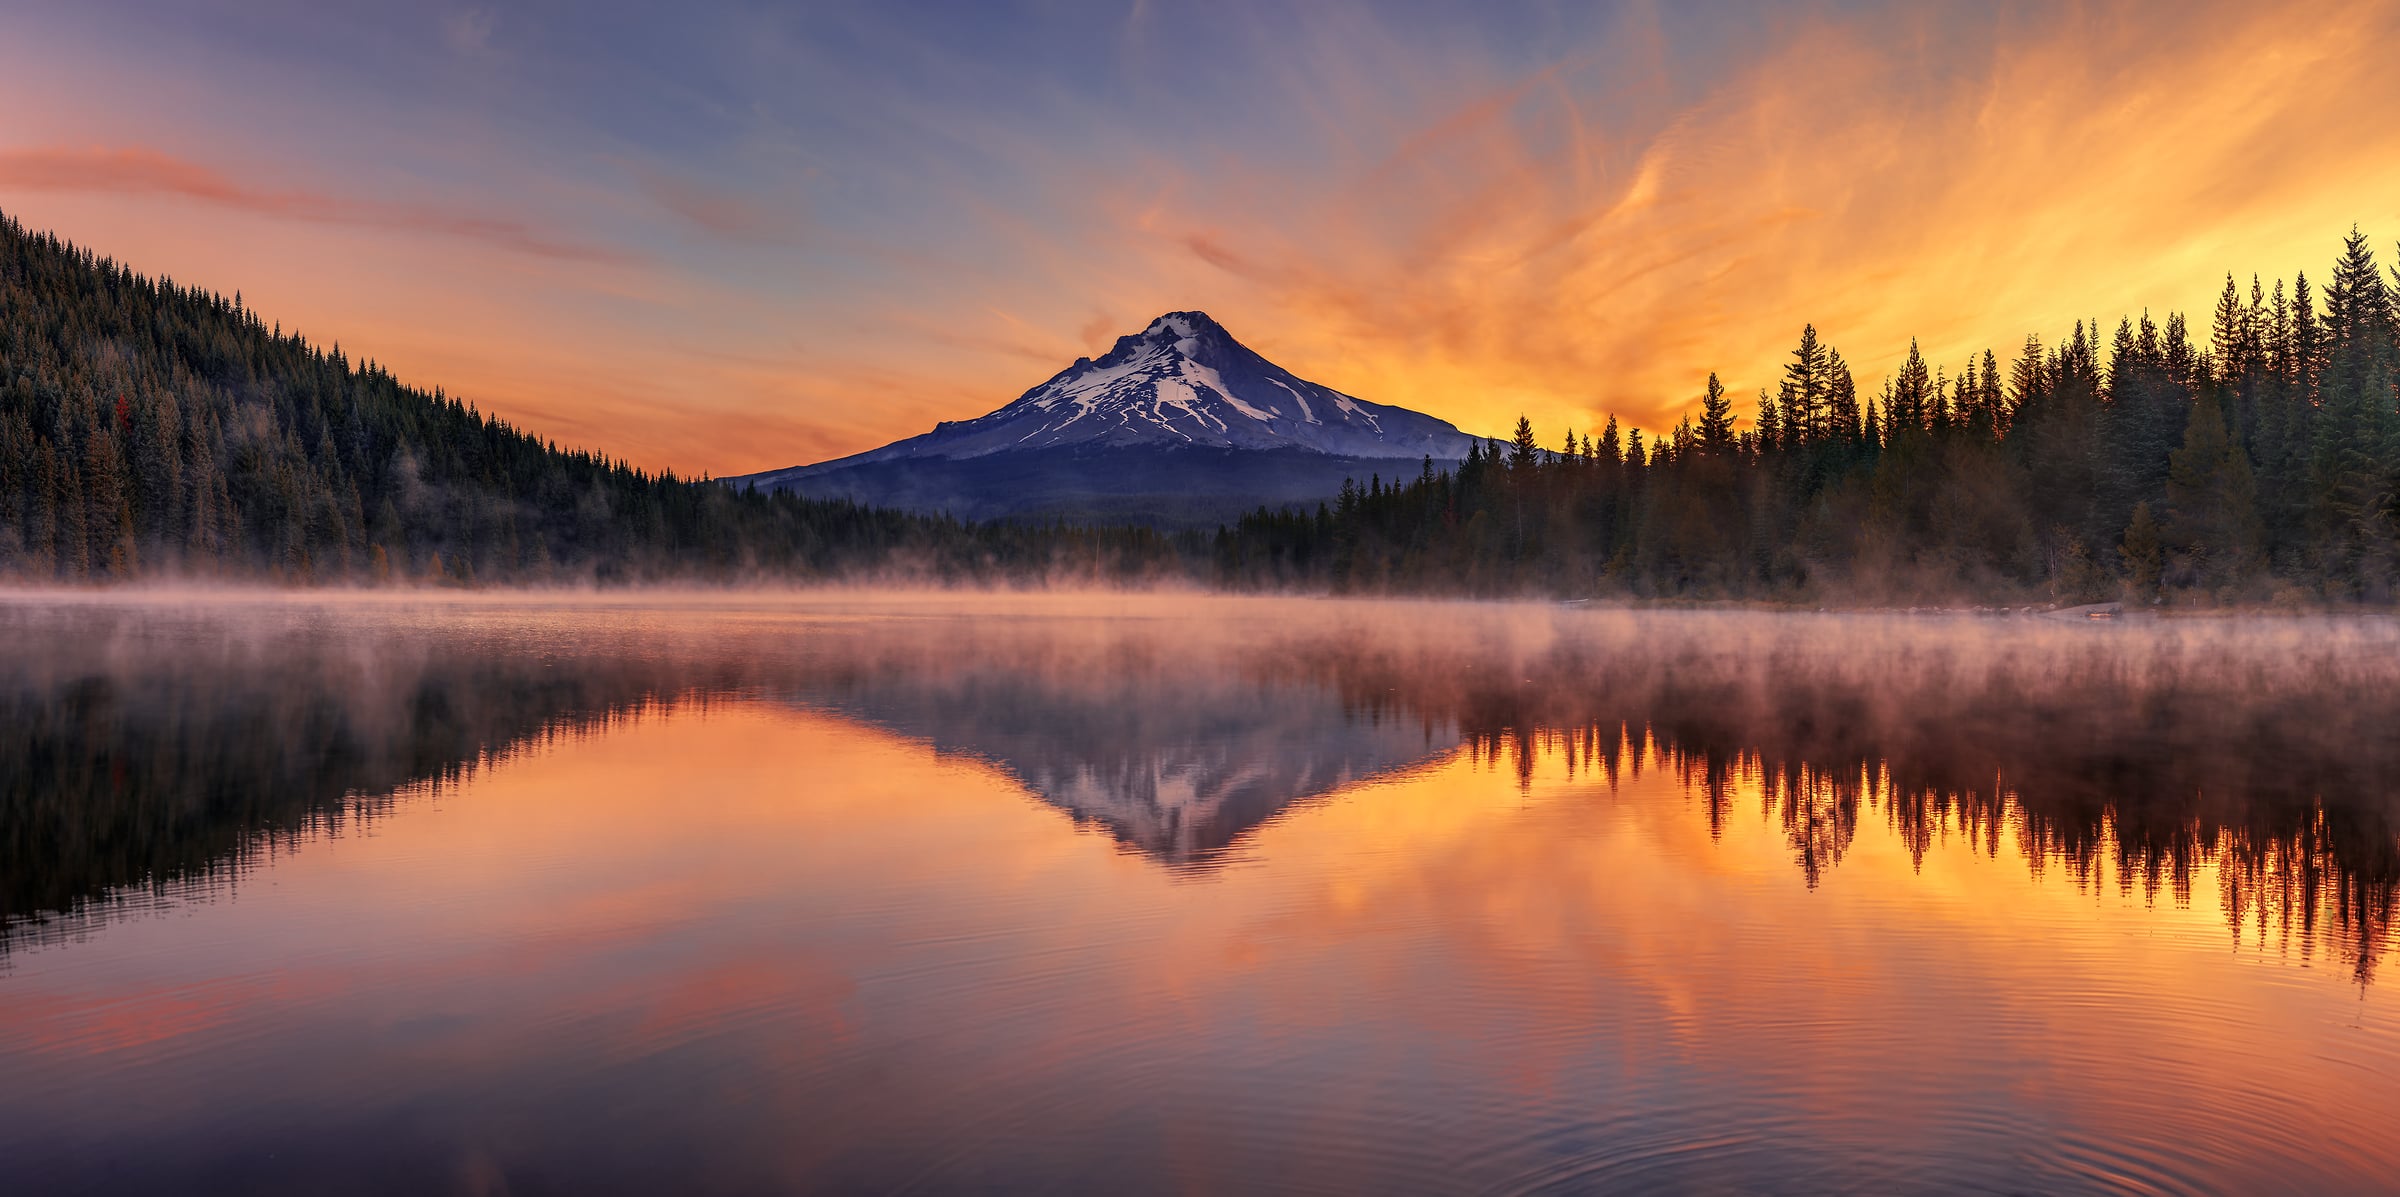 391 megapixels! A very high resolution, large-format VAST photo print of a beautiful landscape; photograph created by Chris Collacott in Trillium Lake, Oregon.